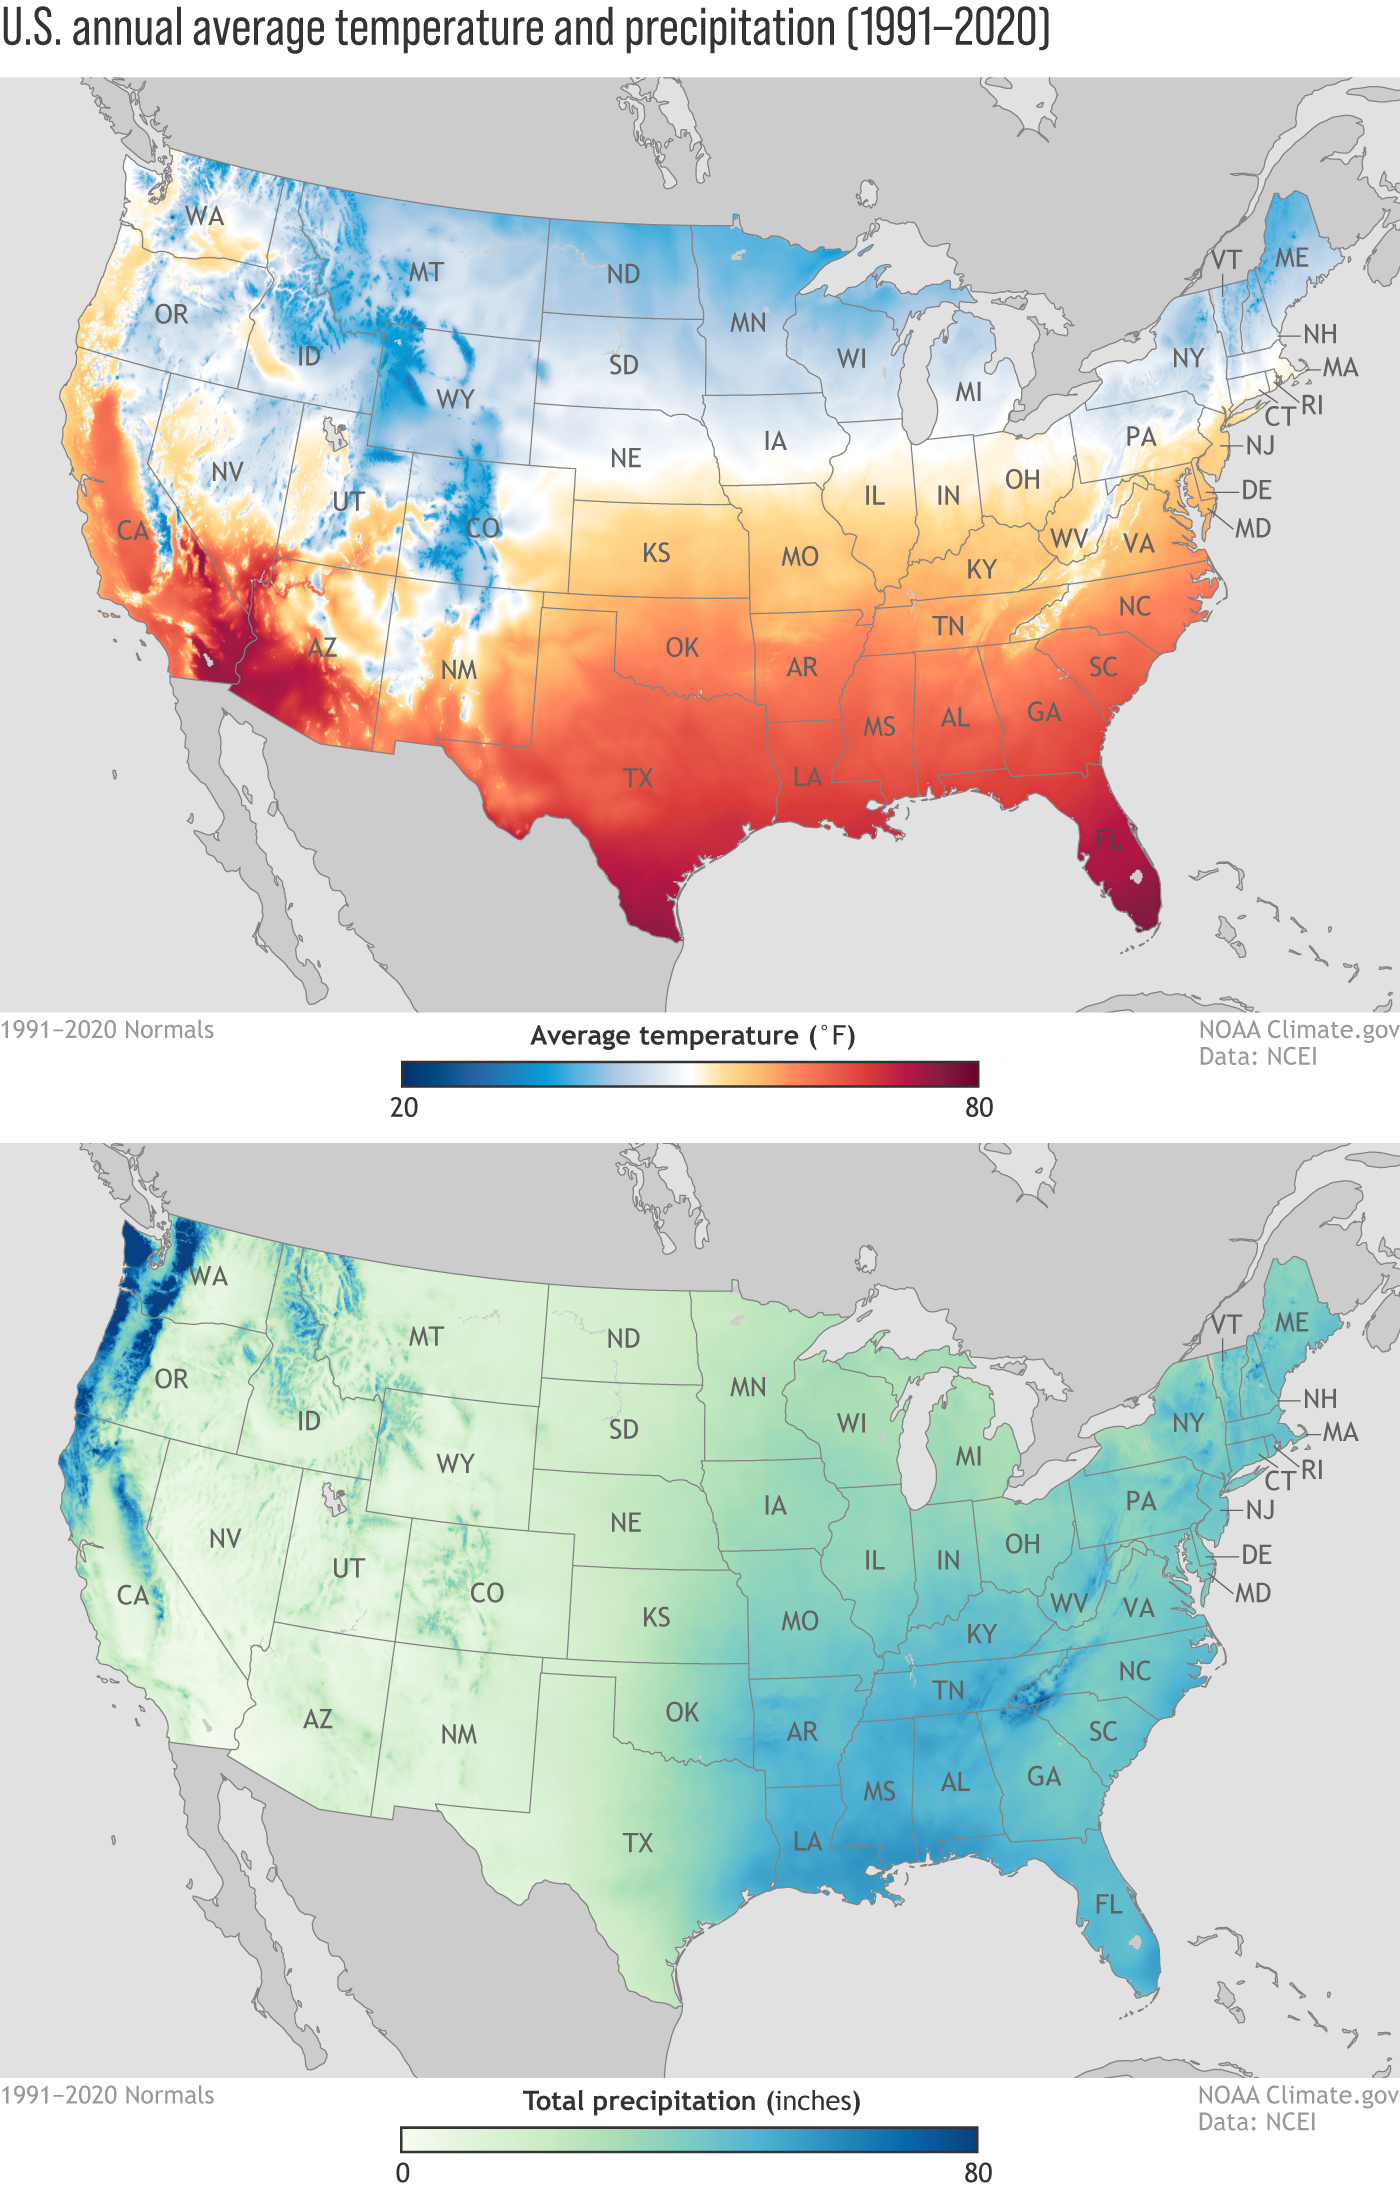 New Maps Released of Annual Average Temperature and Precipitation from how hot is it gonna be tonight